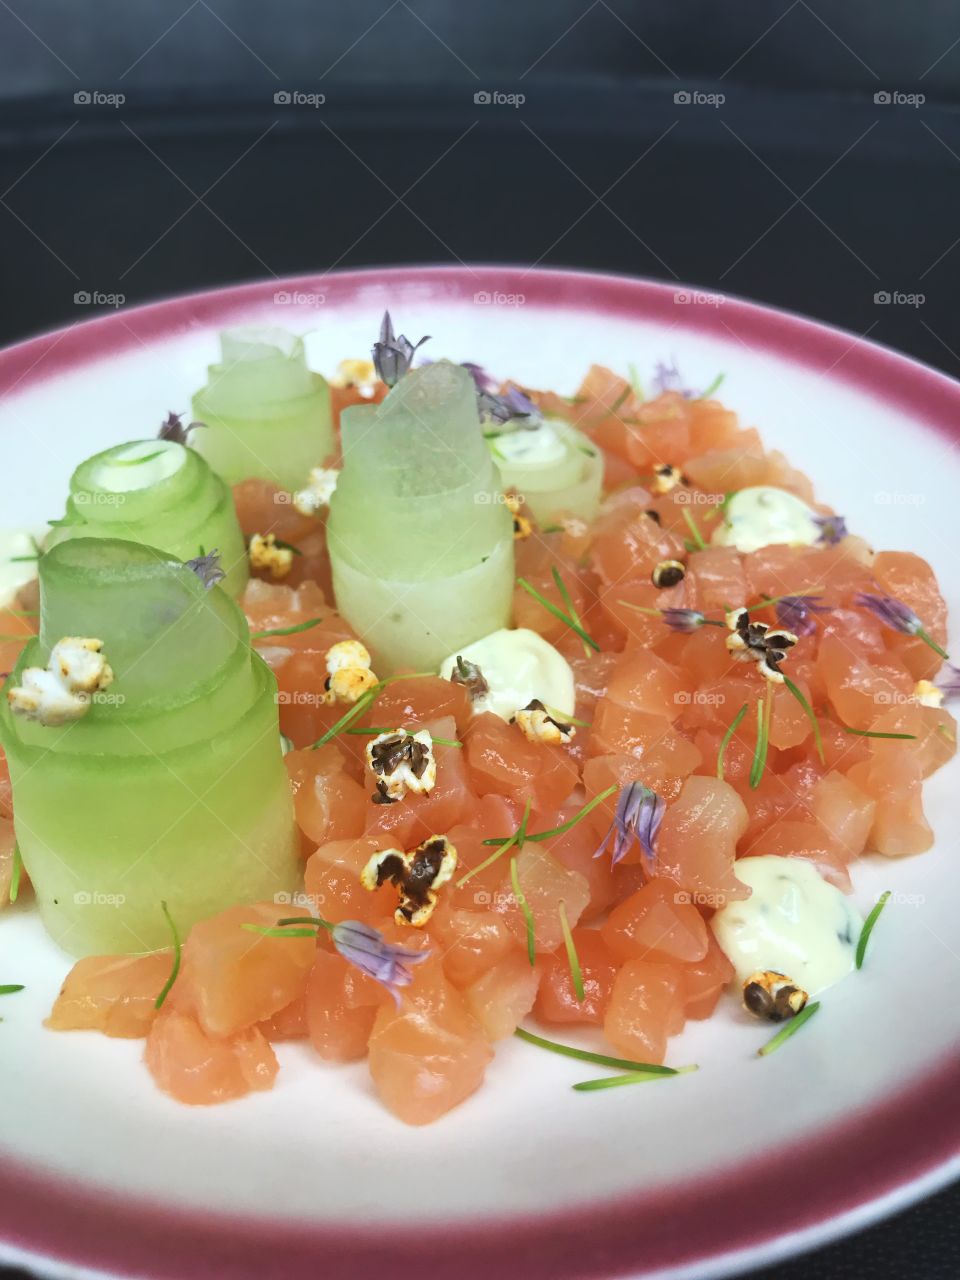 Salmon tartare with cucumber and flowers in a kitchen on a round plate